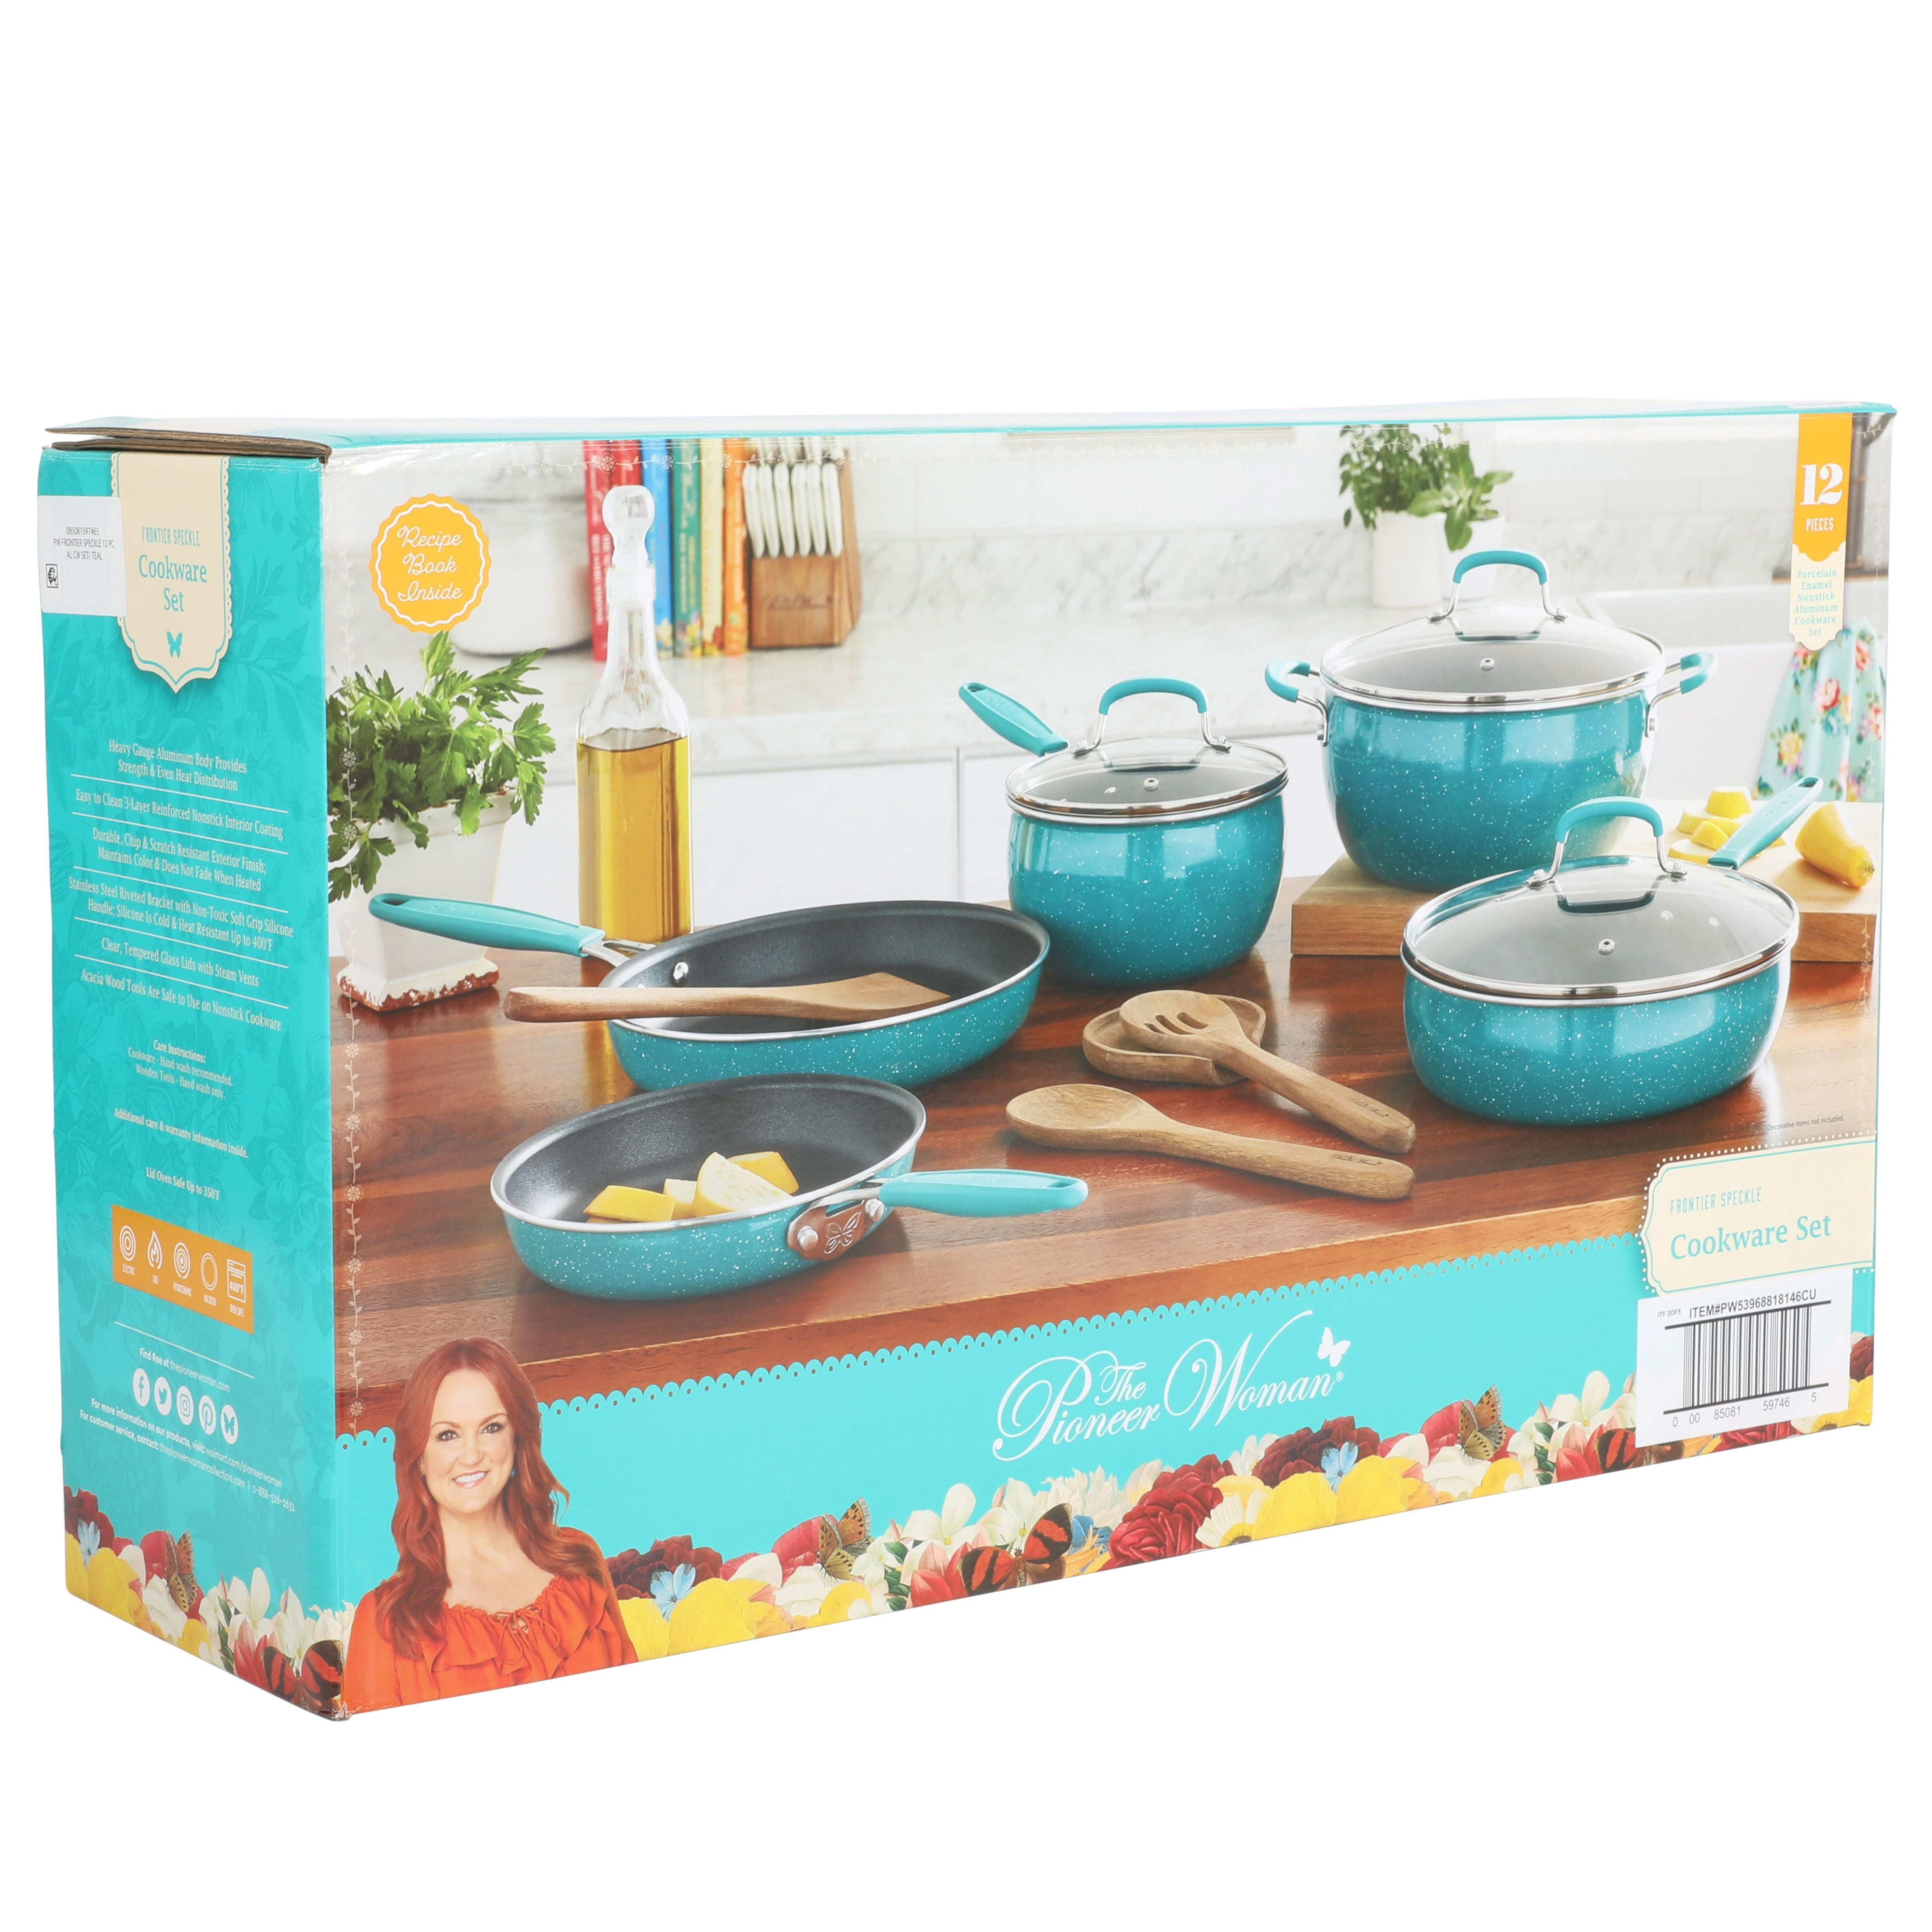 Pioneer Woman Kitchen Products for sale in Leland, North Carolina